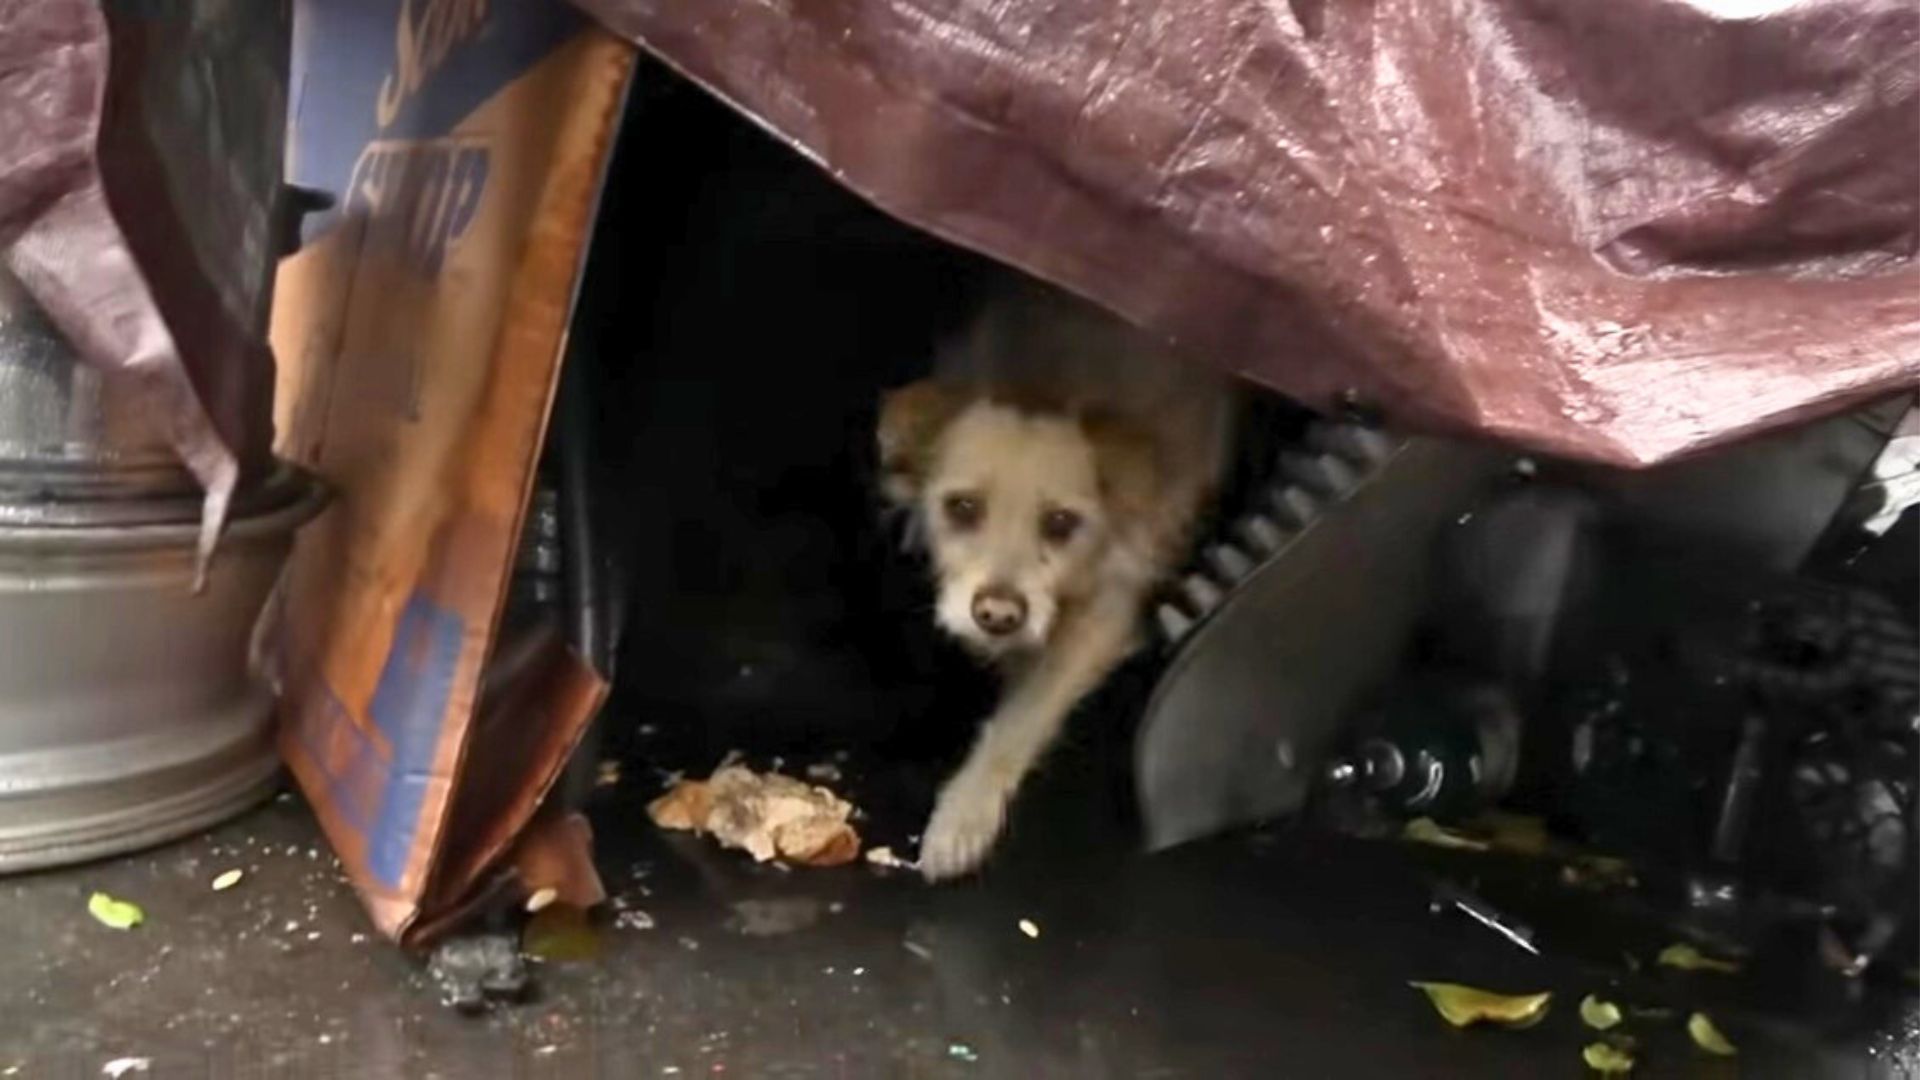 Dog Who Lived In A Junkyard His Whole Life Finally Gets His Own Home